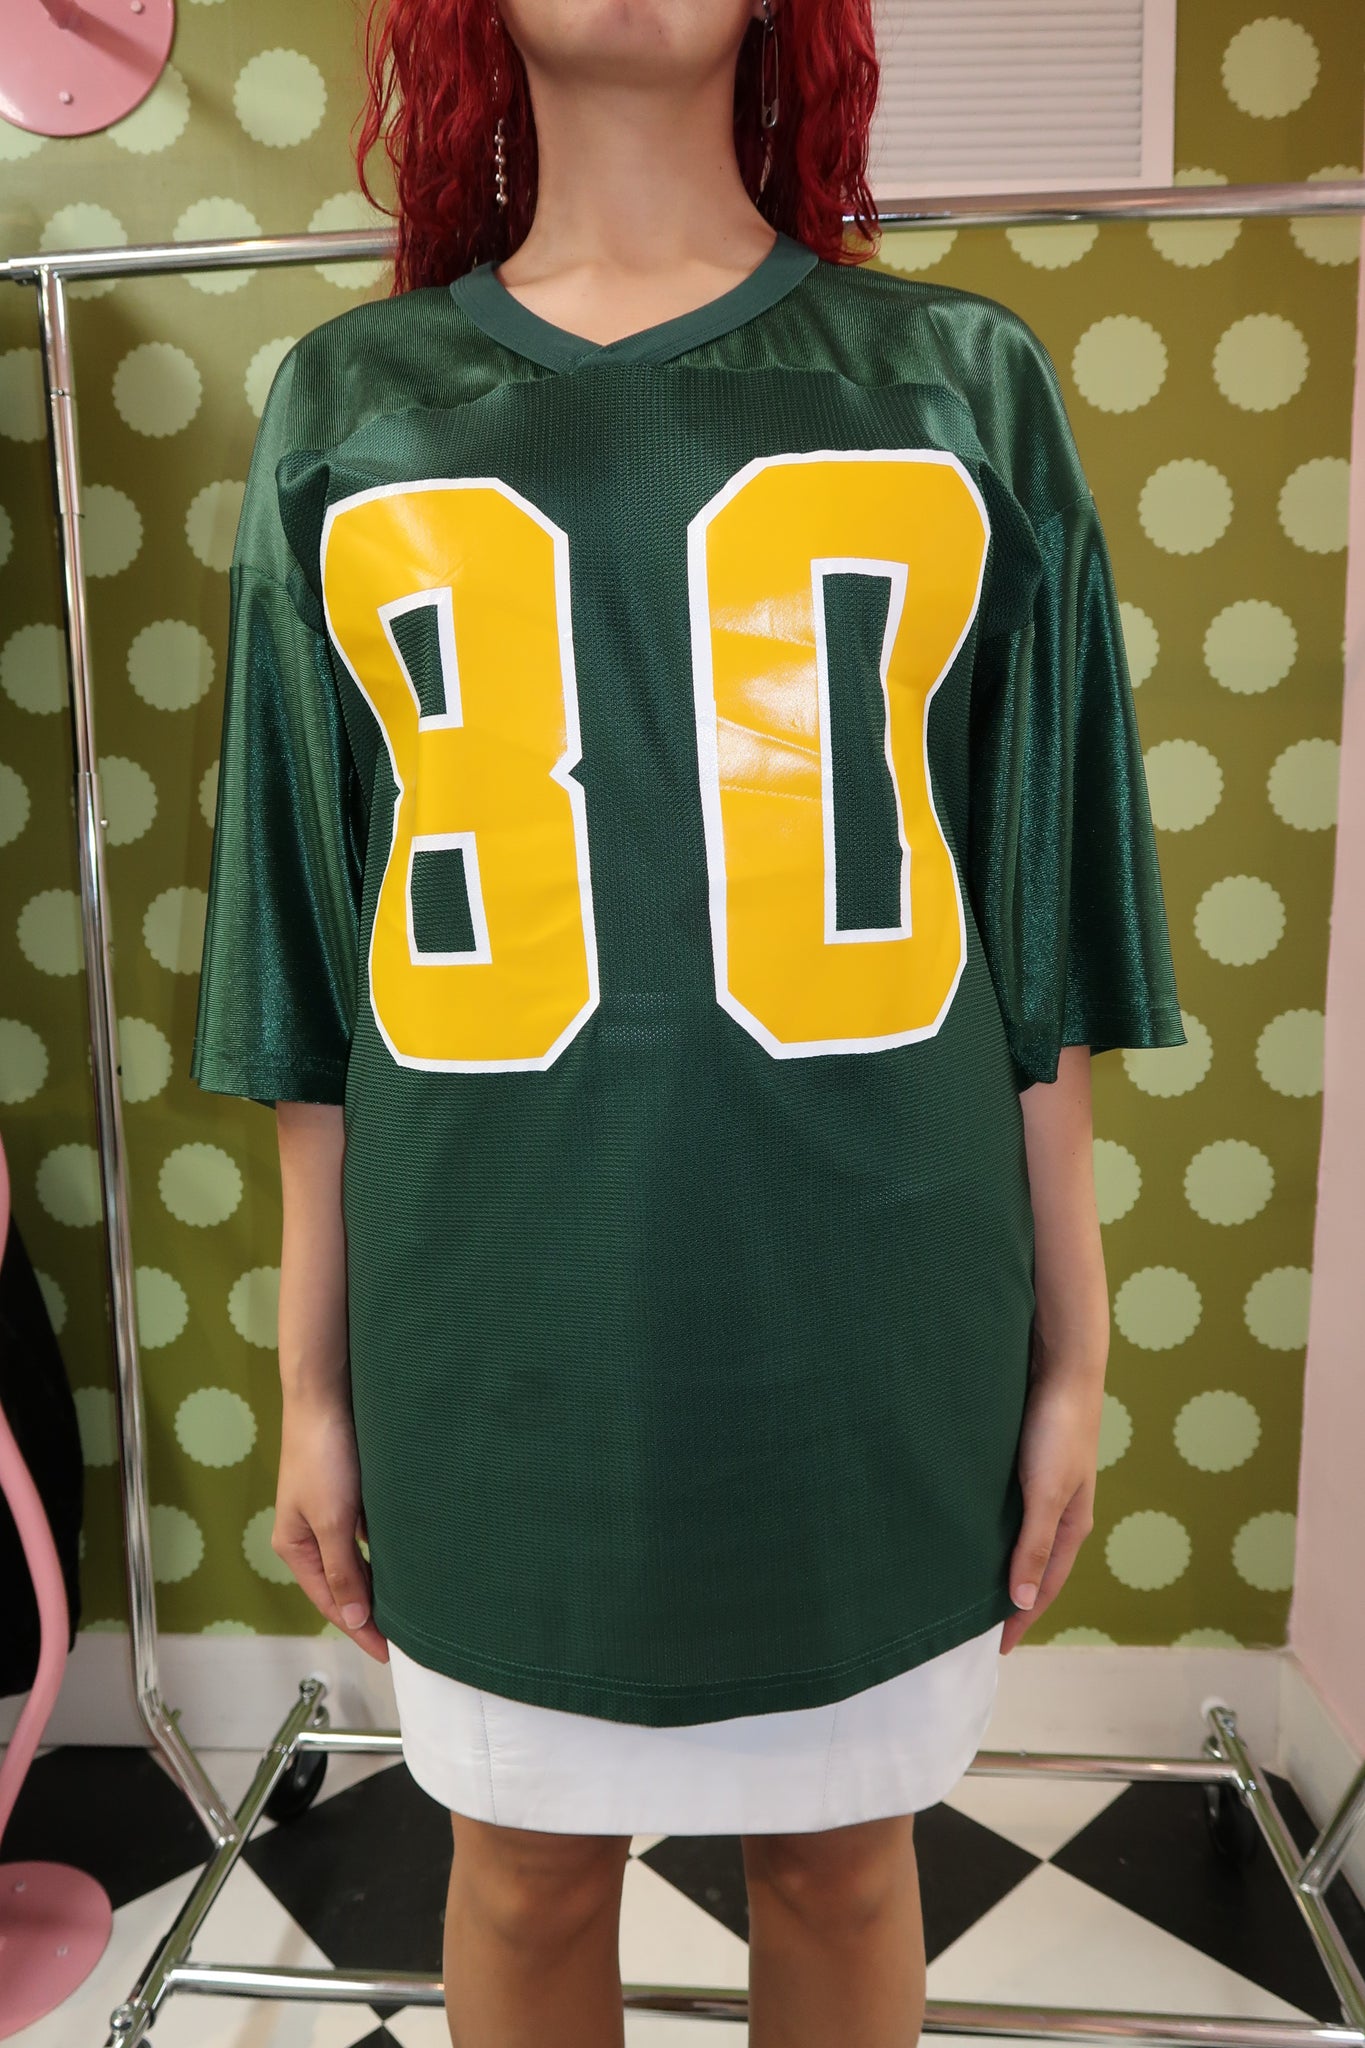 Vintage Green and Yellow Russell Jersey Shirt